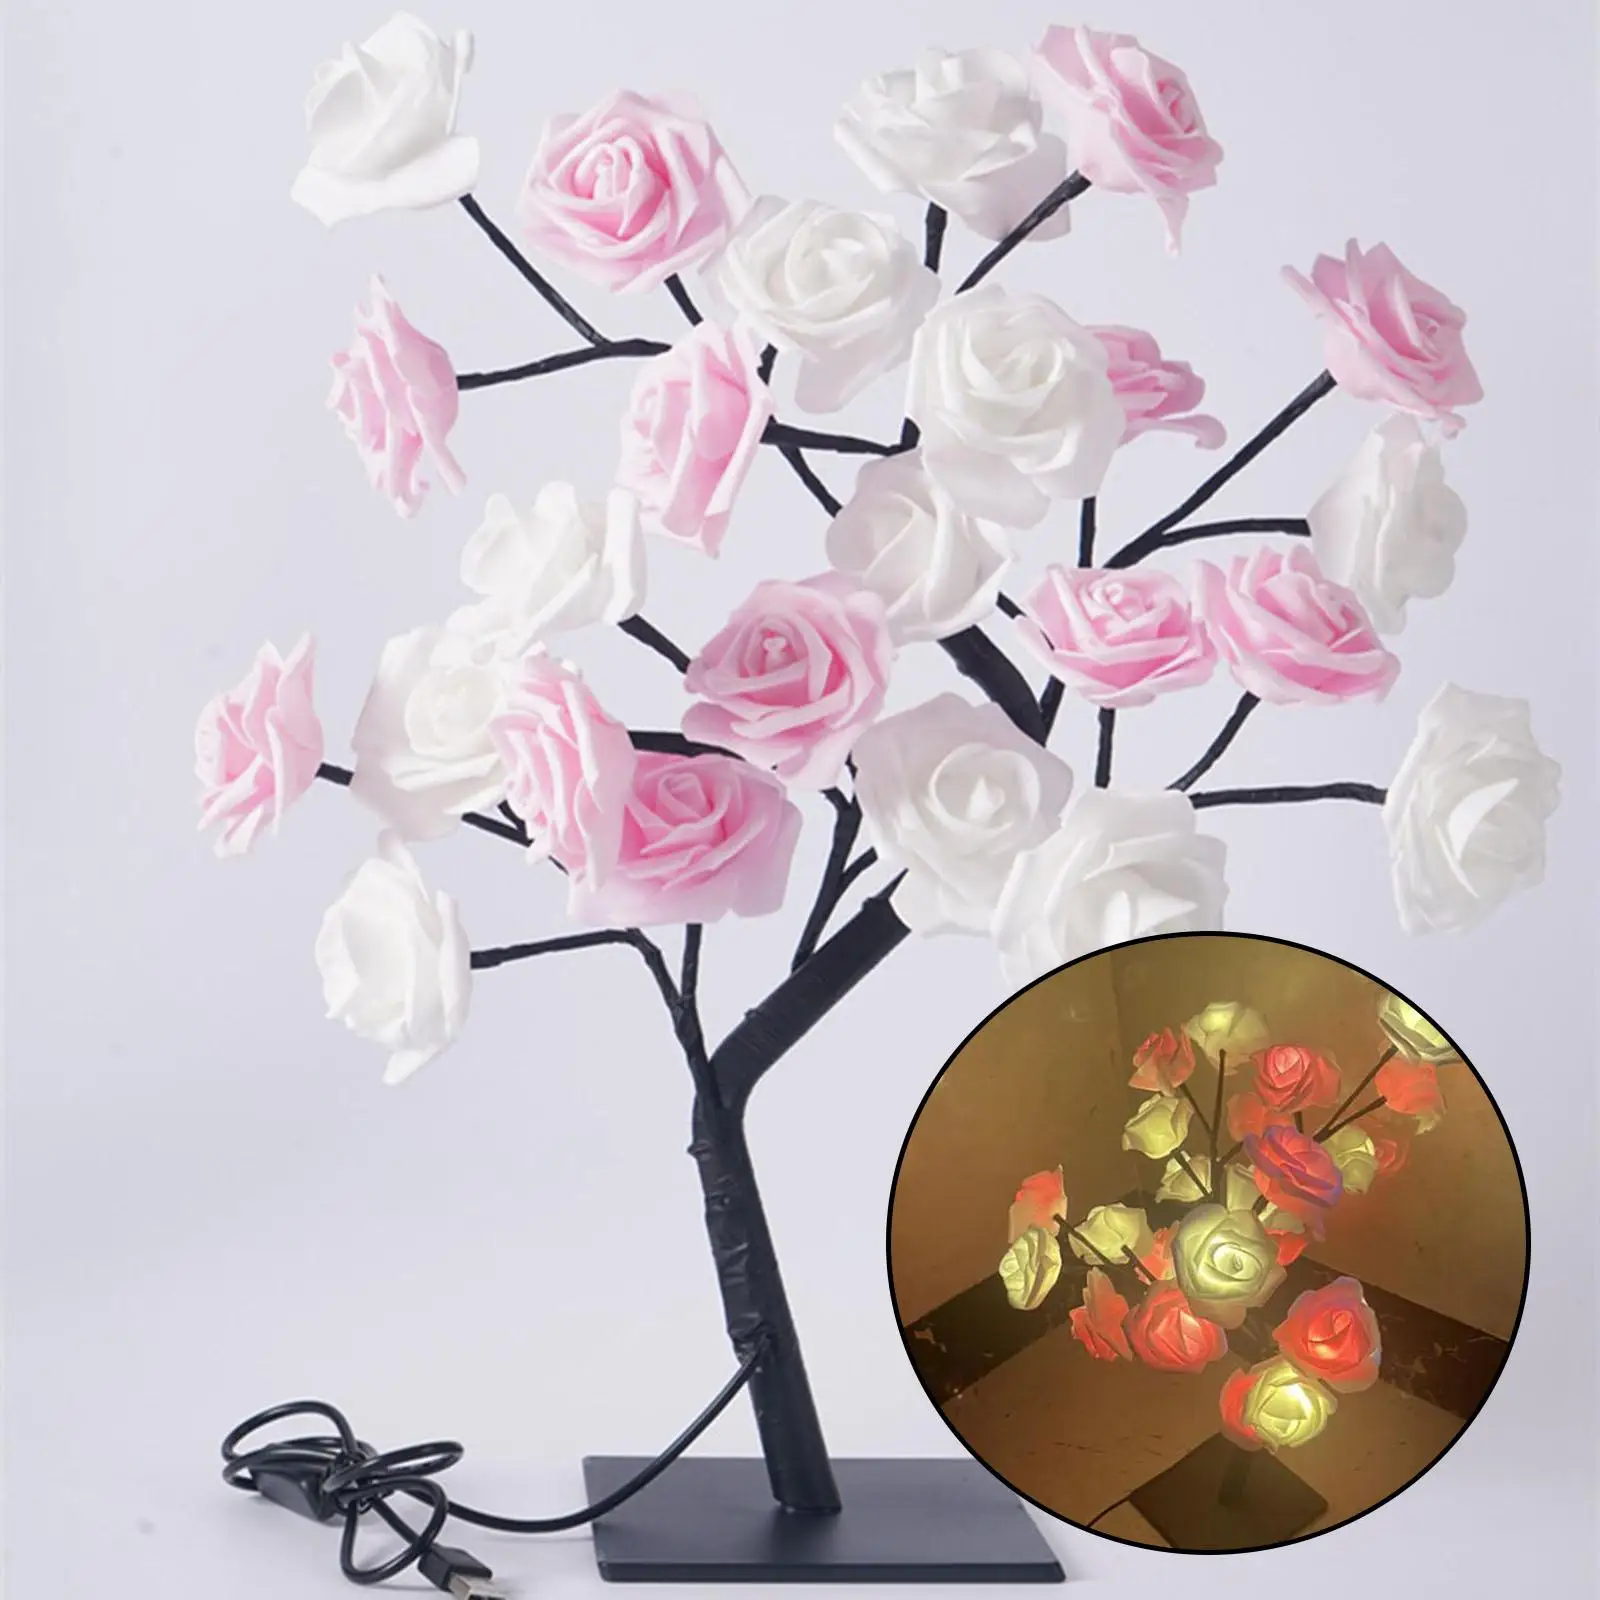 Rose Trees Lamp Night Lights LED Tabletop Centerpiece Aesthetic Flower Lamp for Party Bedroom Wedding Living Room Birthday